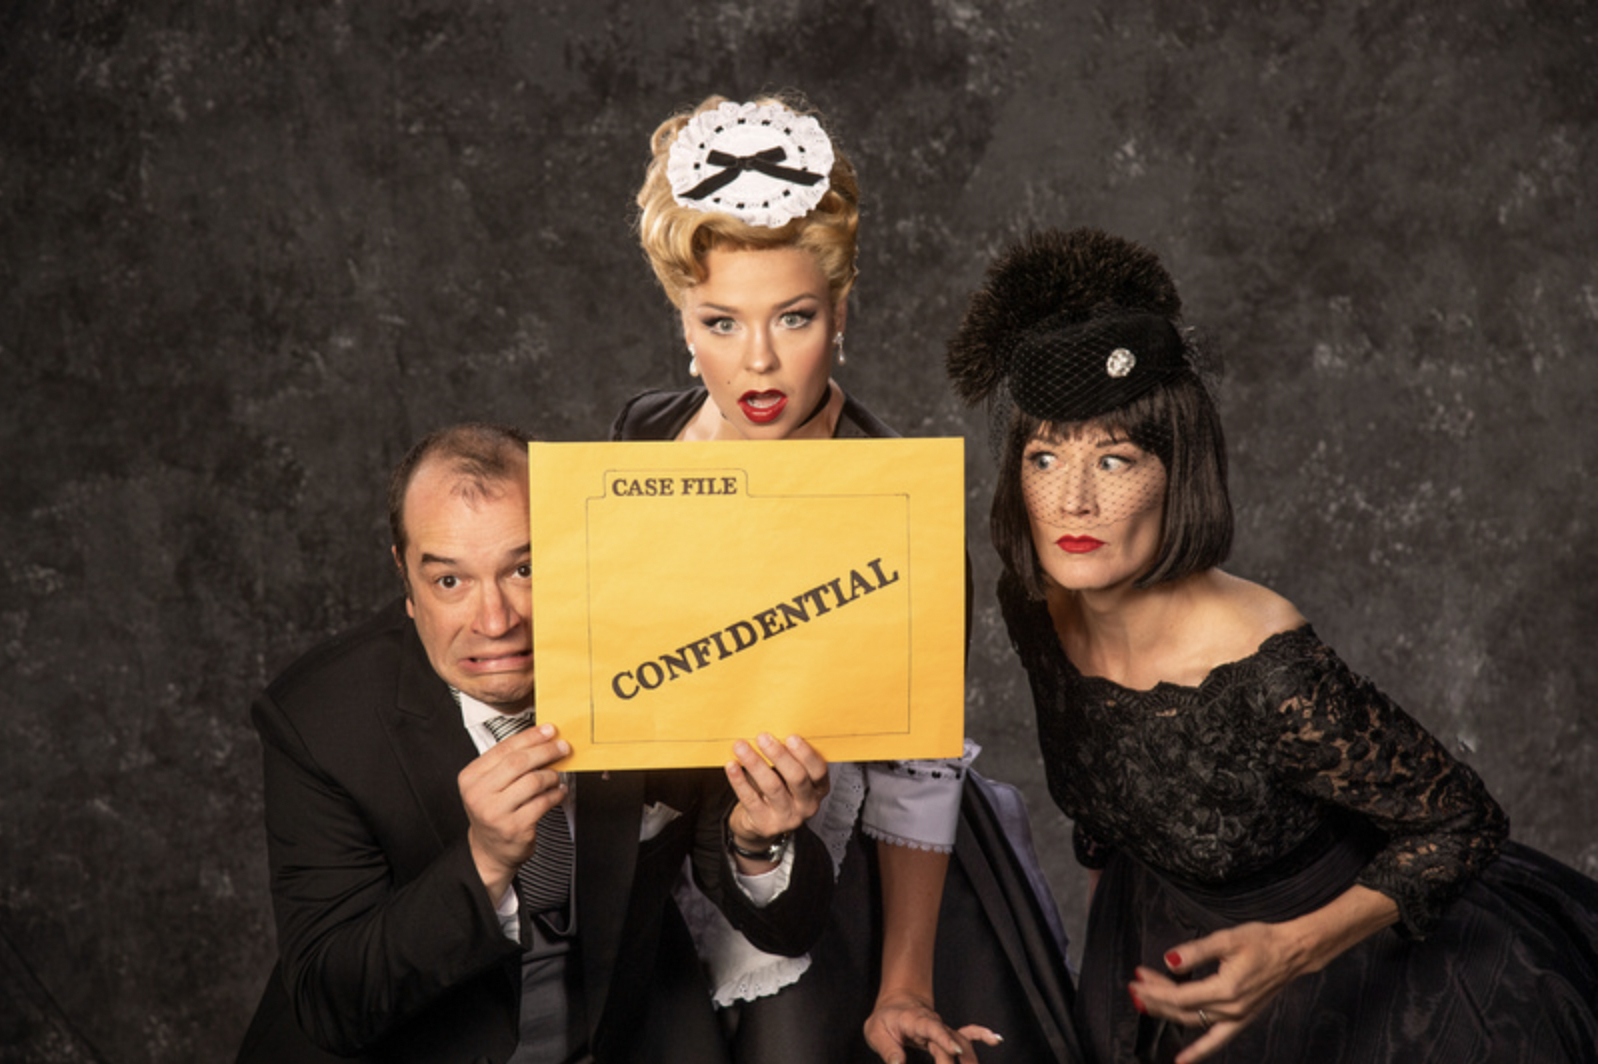 Aaron Galligan-Stierle (left) as Wadsworth, Bailey Blaise as Yvette, and Melinda Parrett as Mrs. White in the Utah Shakespeare Festival’s 2022 production of Clue. (Photo by Karl Hugh. Copyright Utah Shakespeare Festival 2022.)